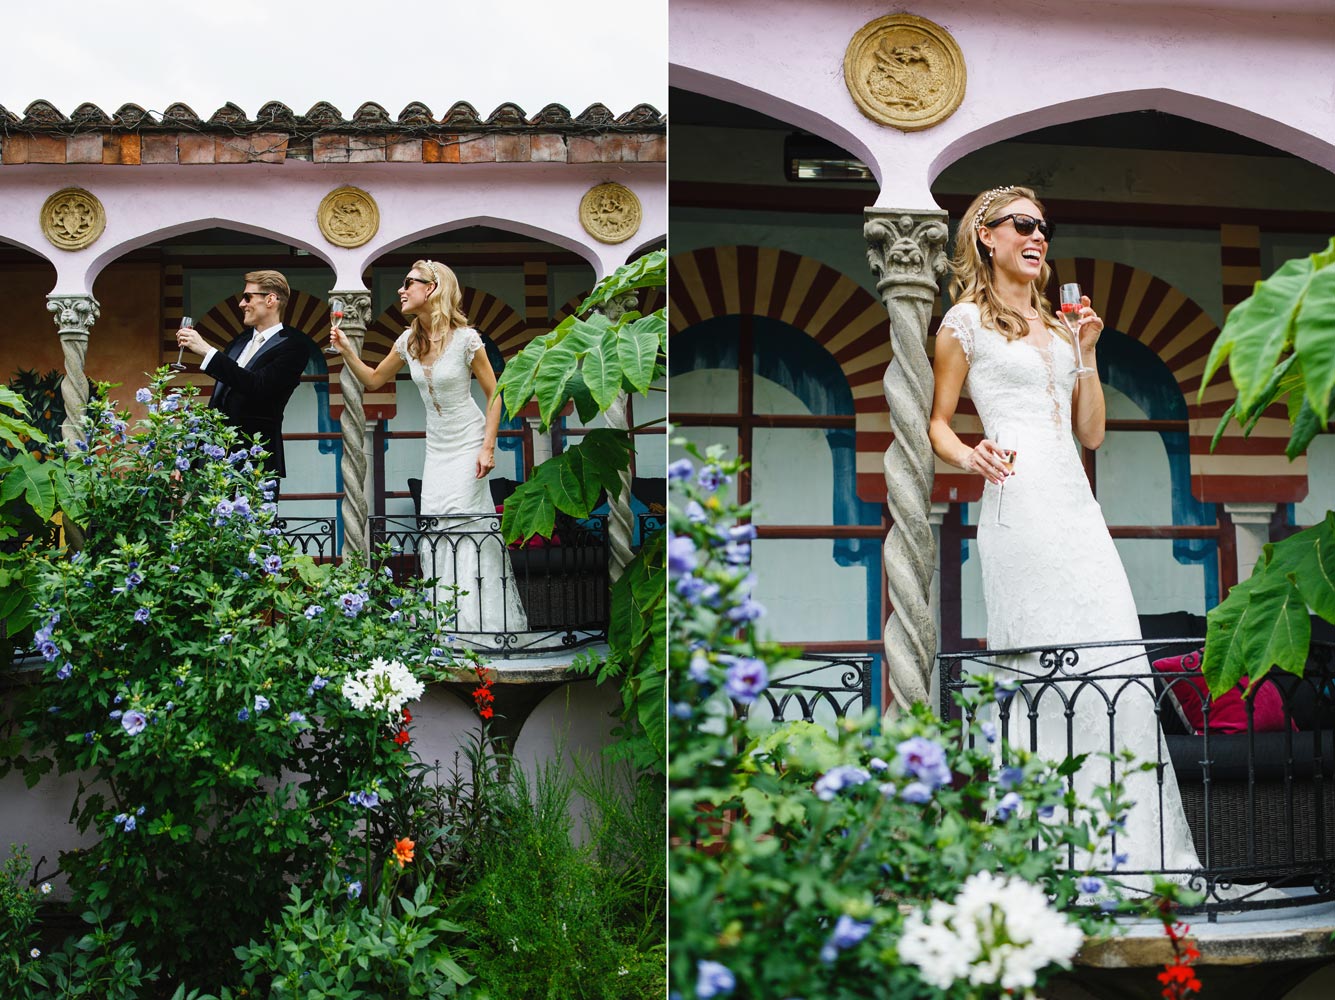 A couple poses for photographs at the Roof Gardens in Kensington - London wedding photographer